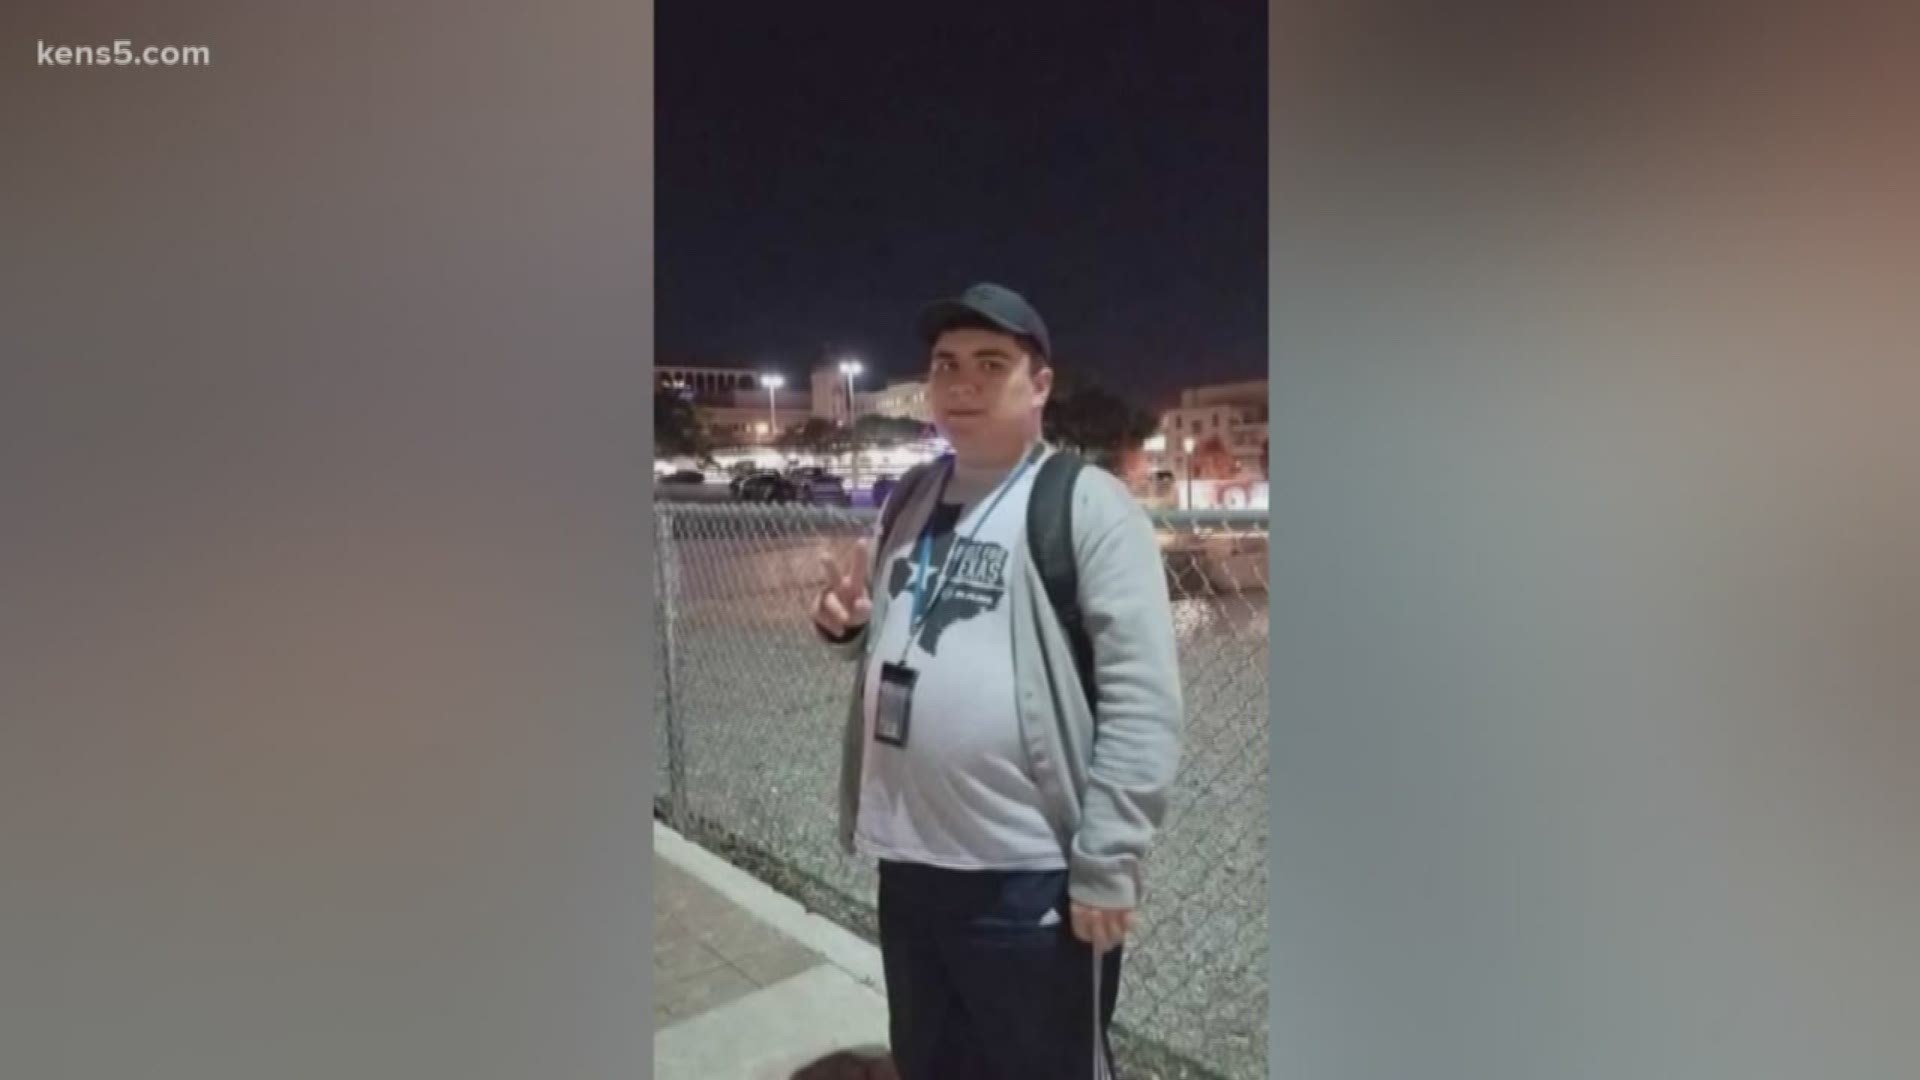 KENS 5 tracks down an autistic 20-year-old who'd been missing all day. The family says a Lyft driver dropped him off at the wrong location this morning. Eyewitness News reporter Henry Ramos is live with where he was found.